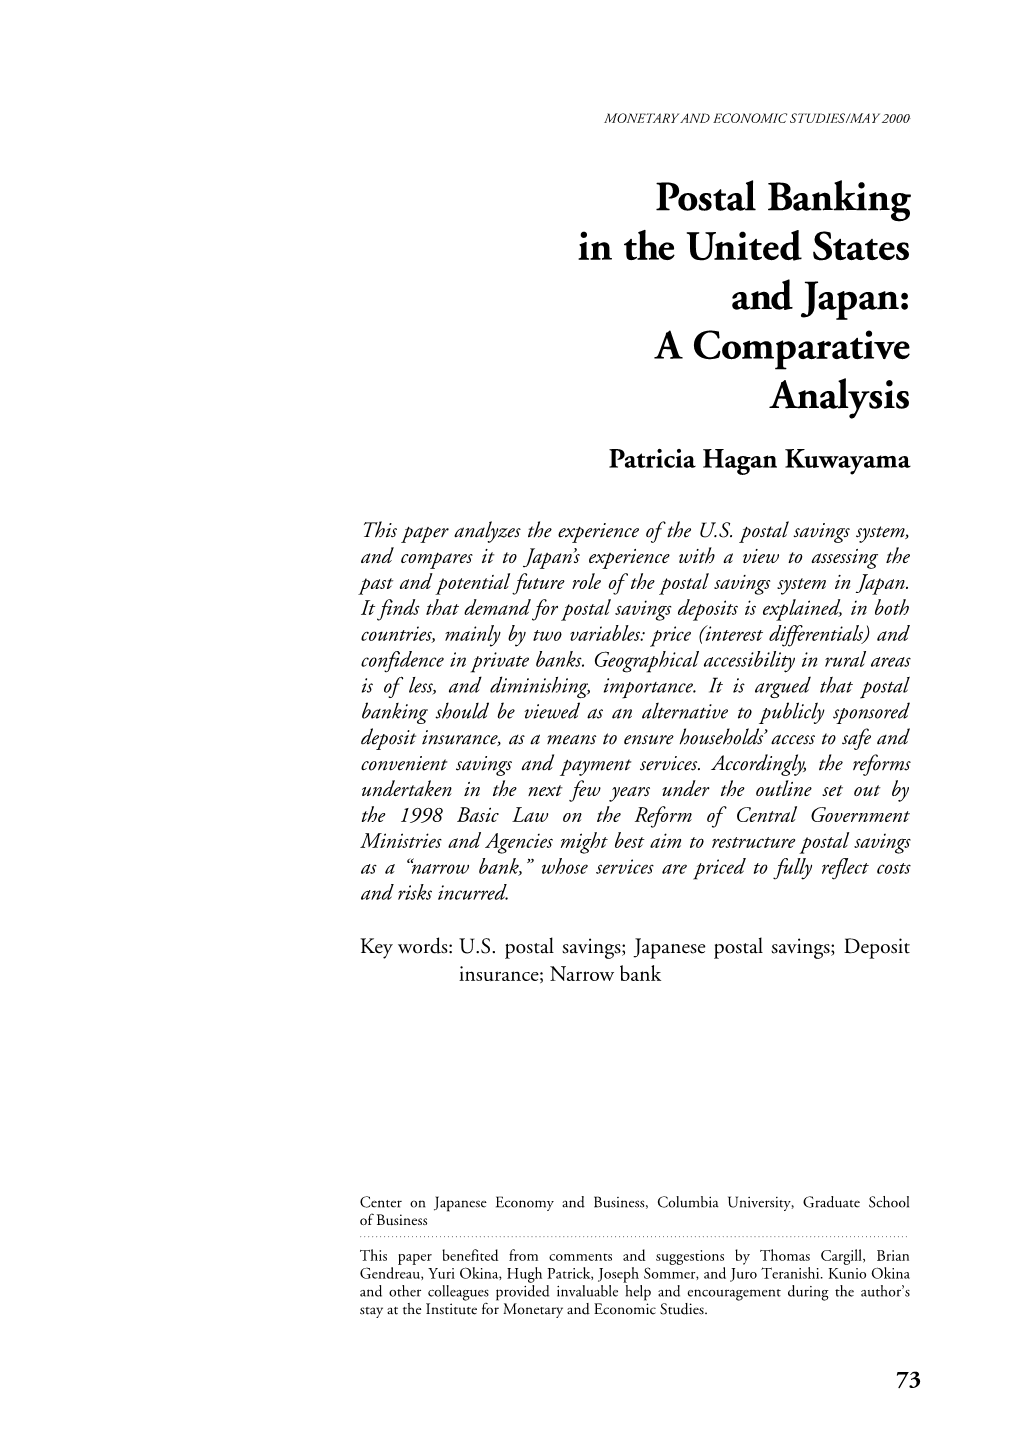 Postal Banking in the United States and Japan: a Comparative Analysis